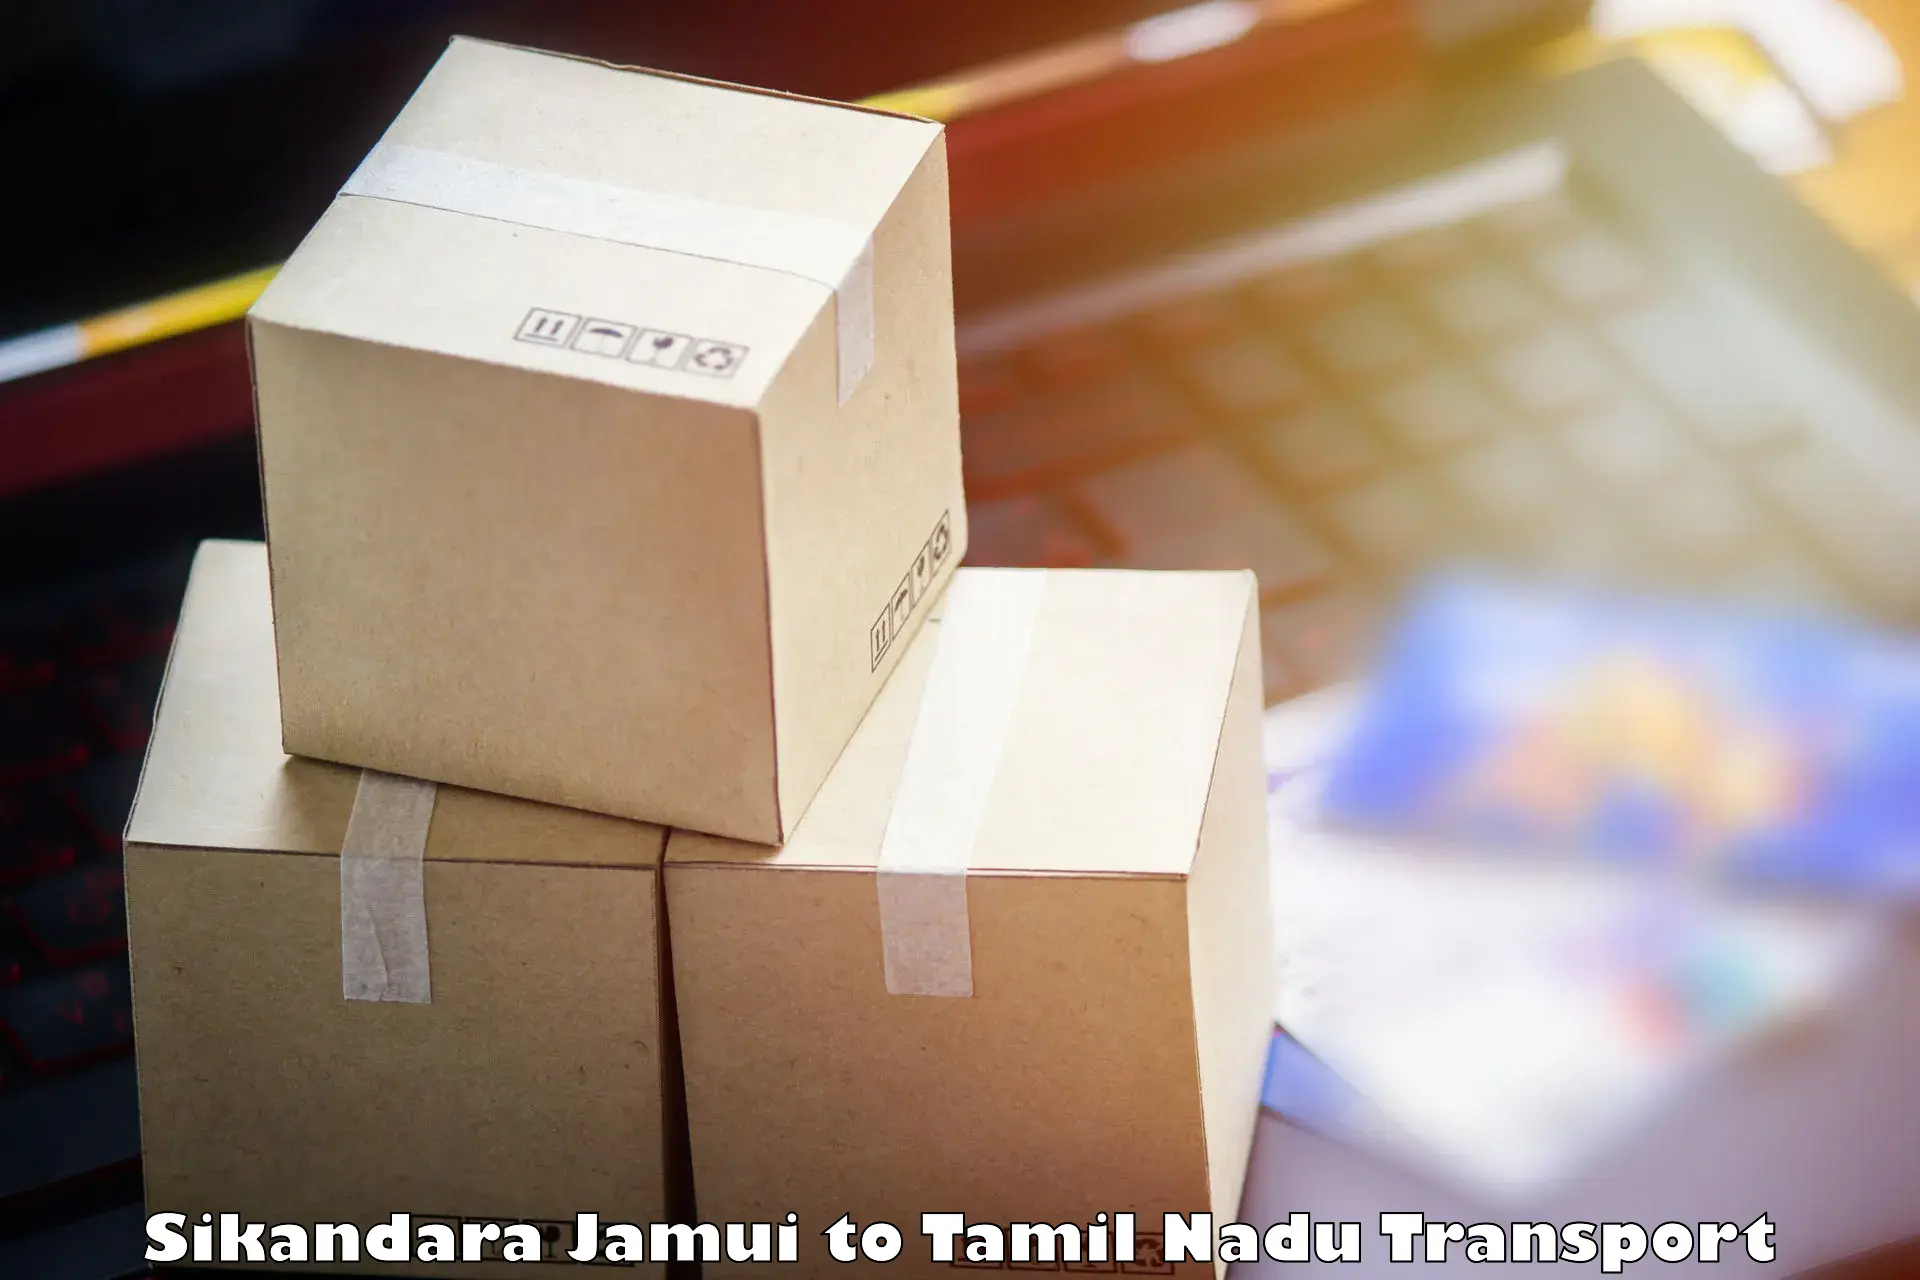 Goods delivery service Sikandara Jamui to Gudalur